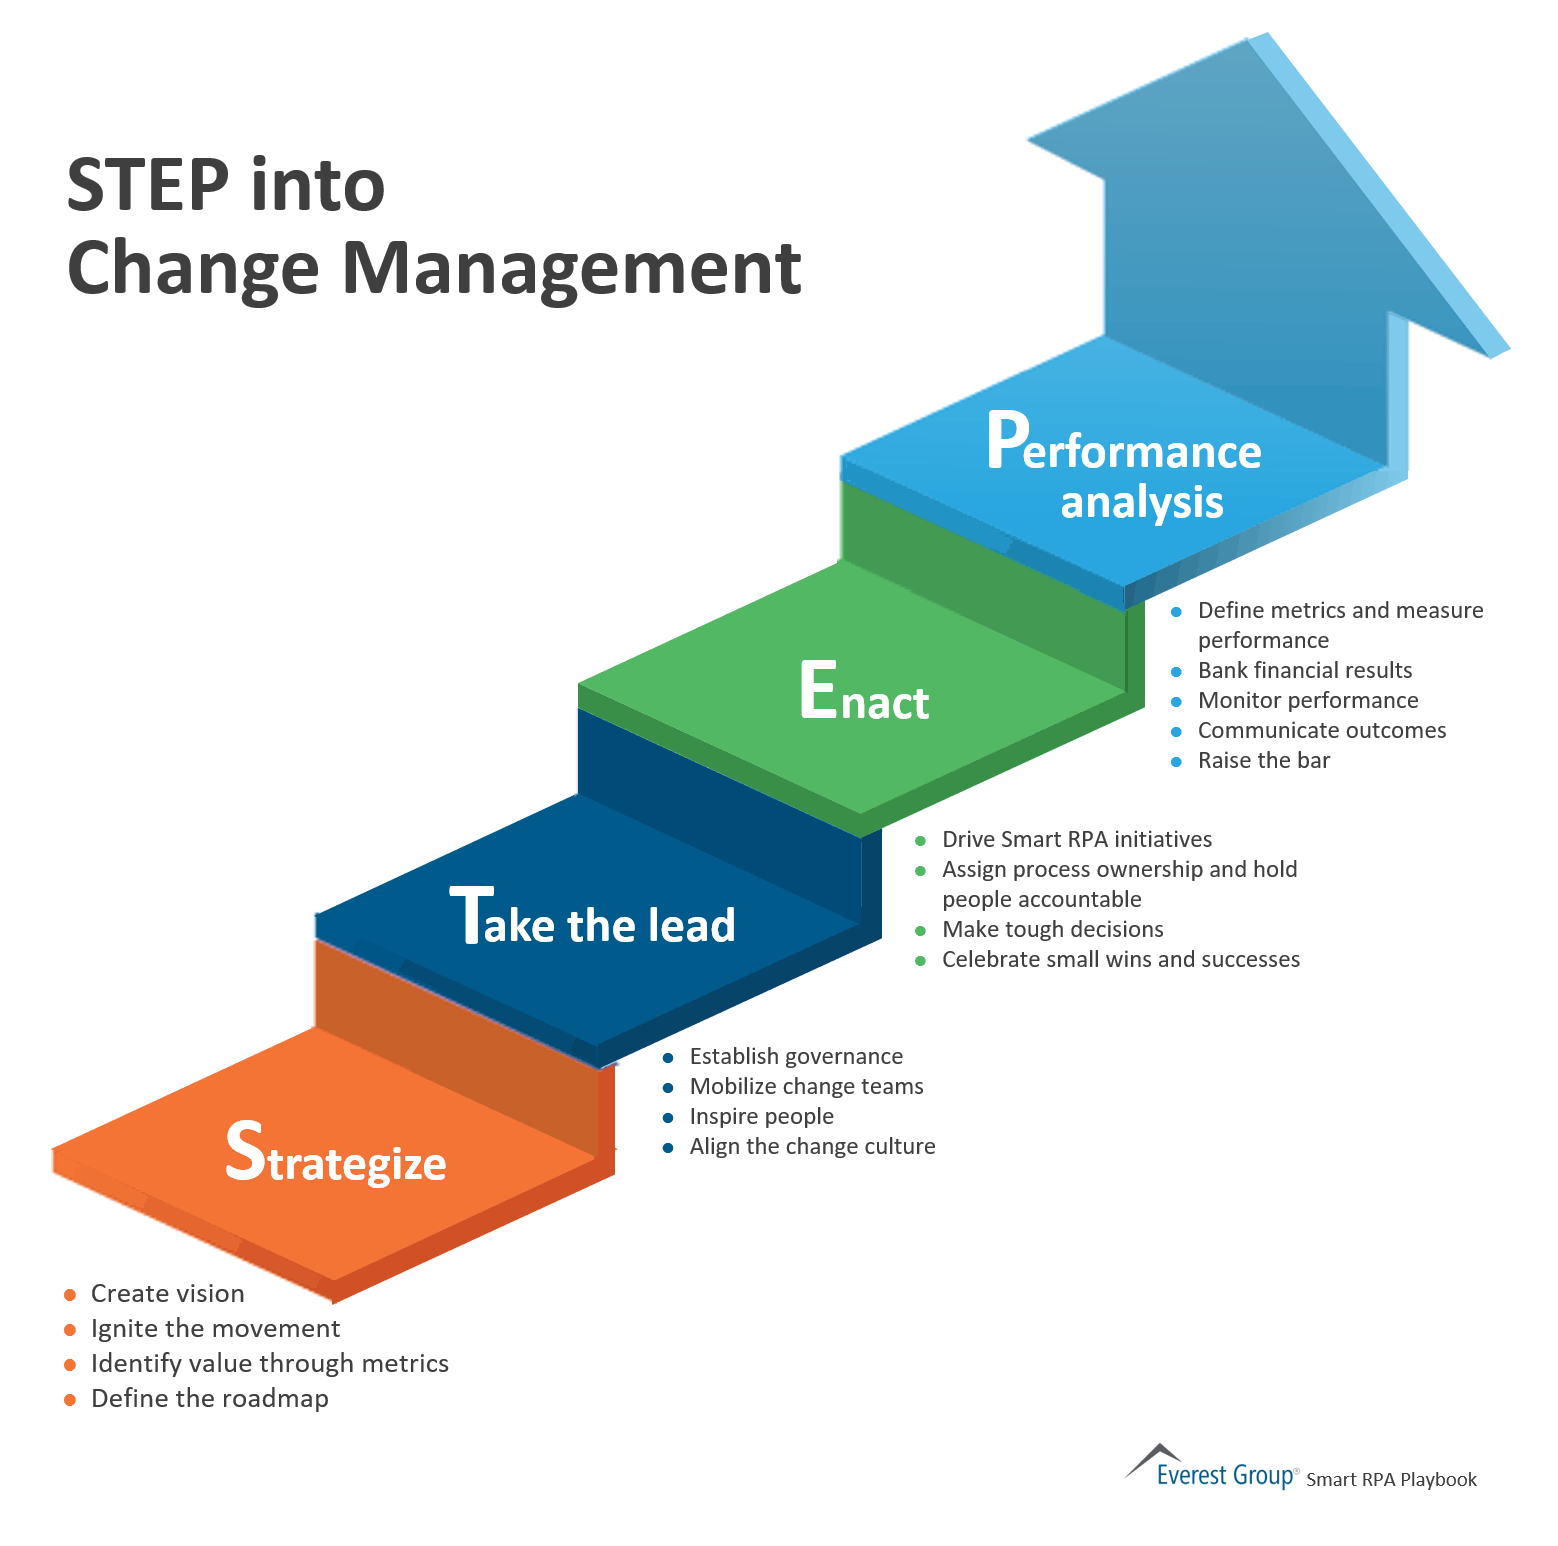 STEP into Change Management